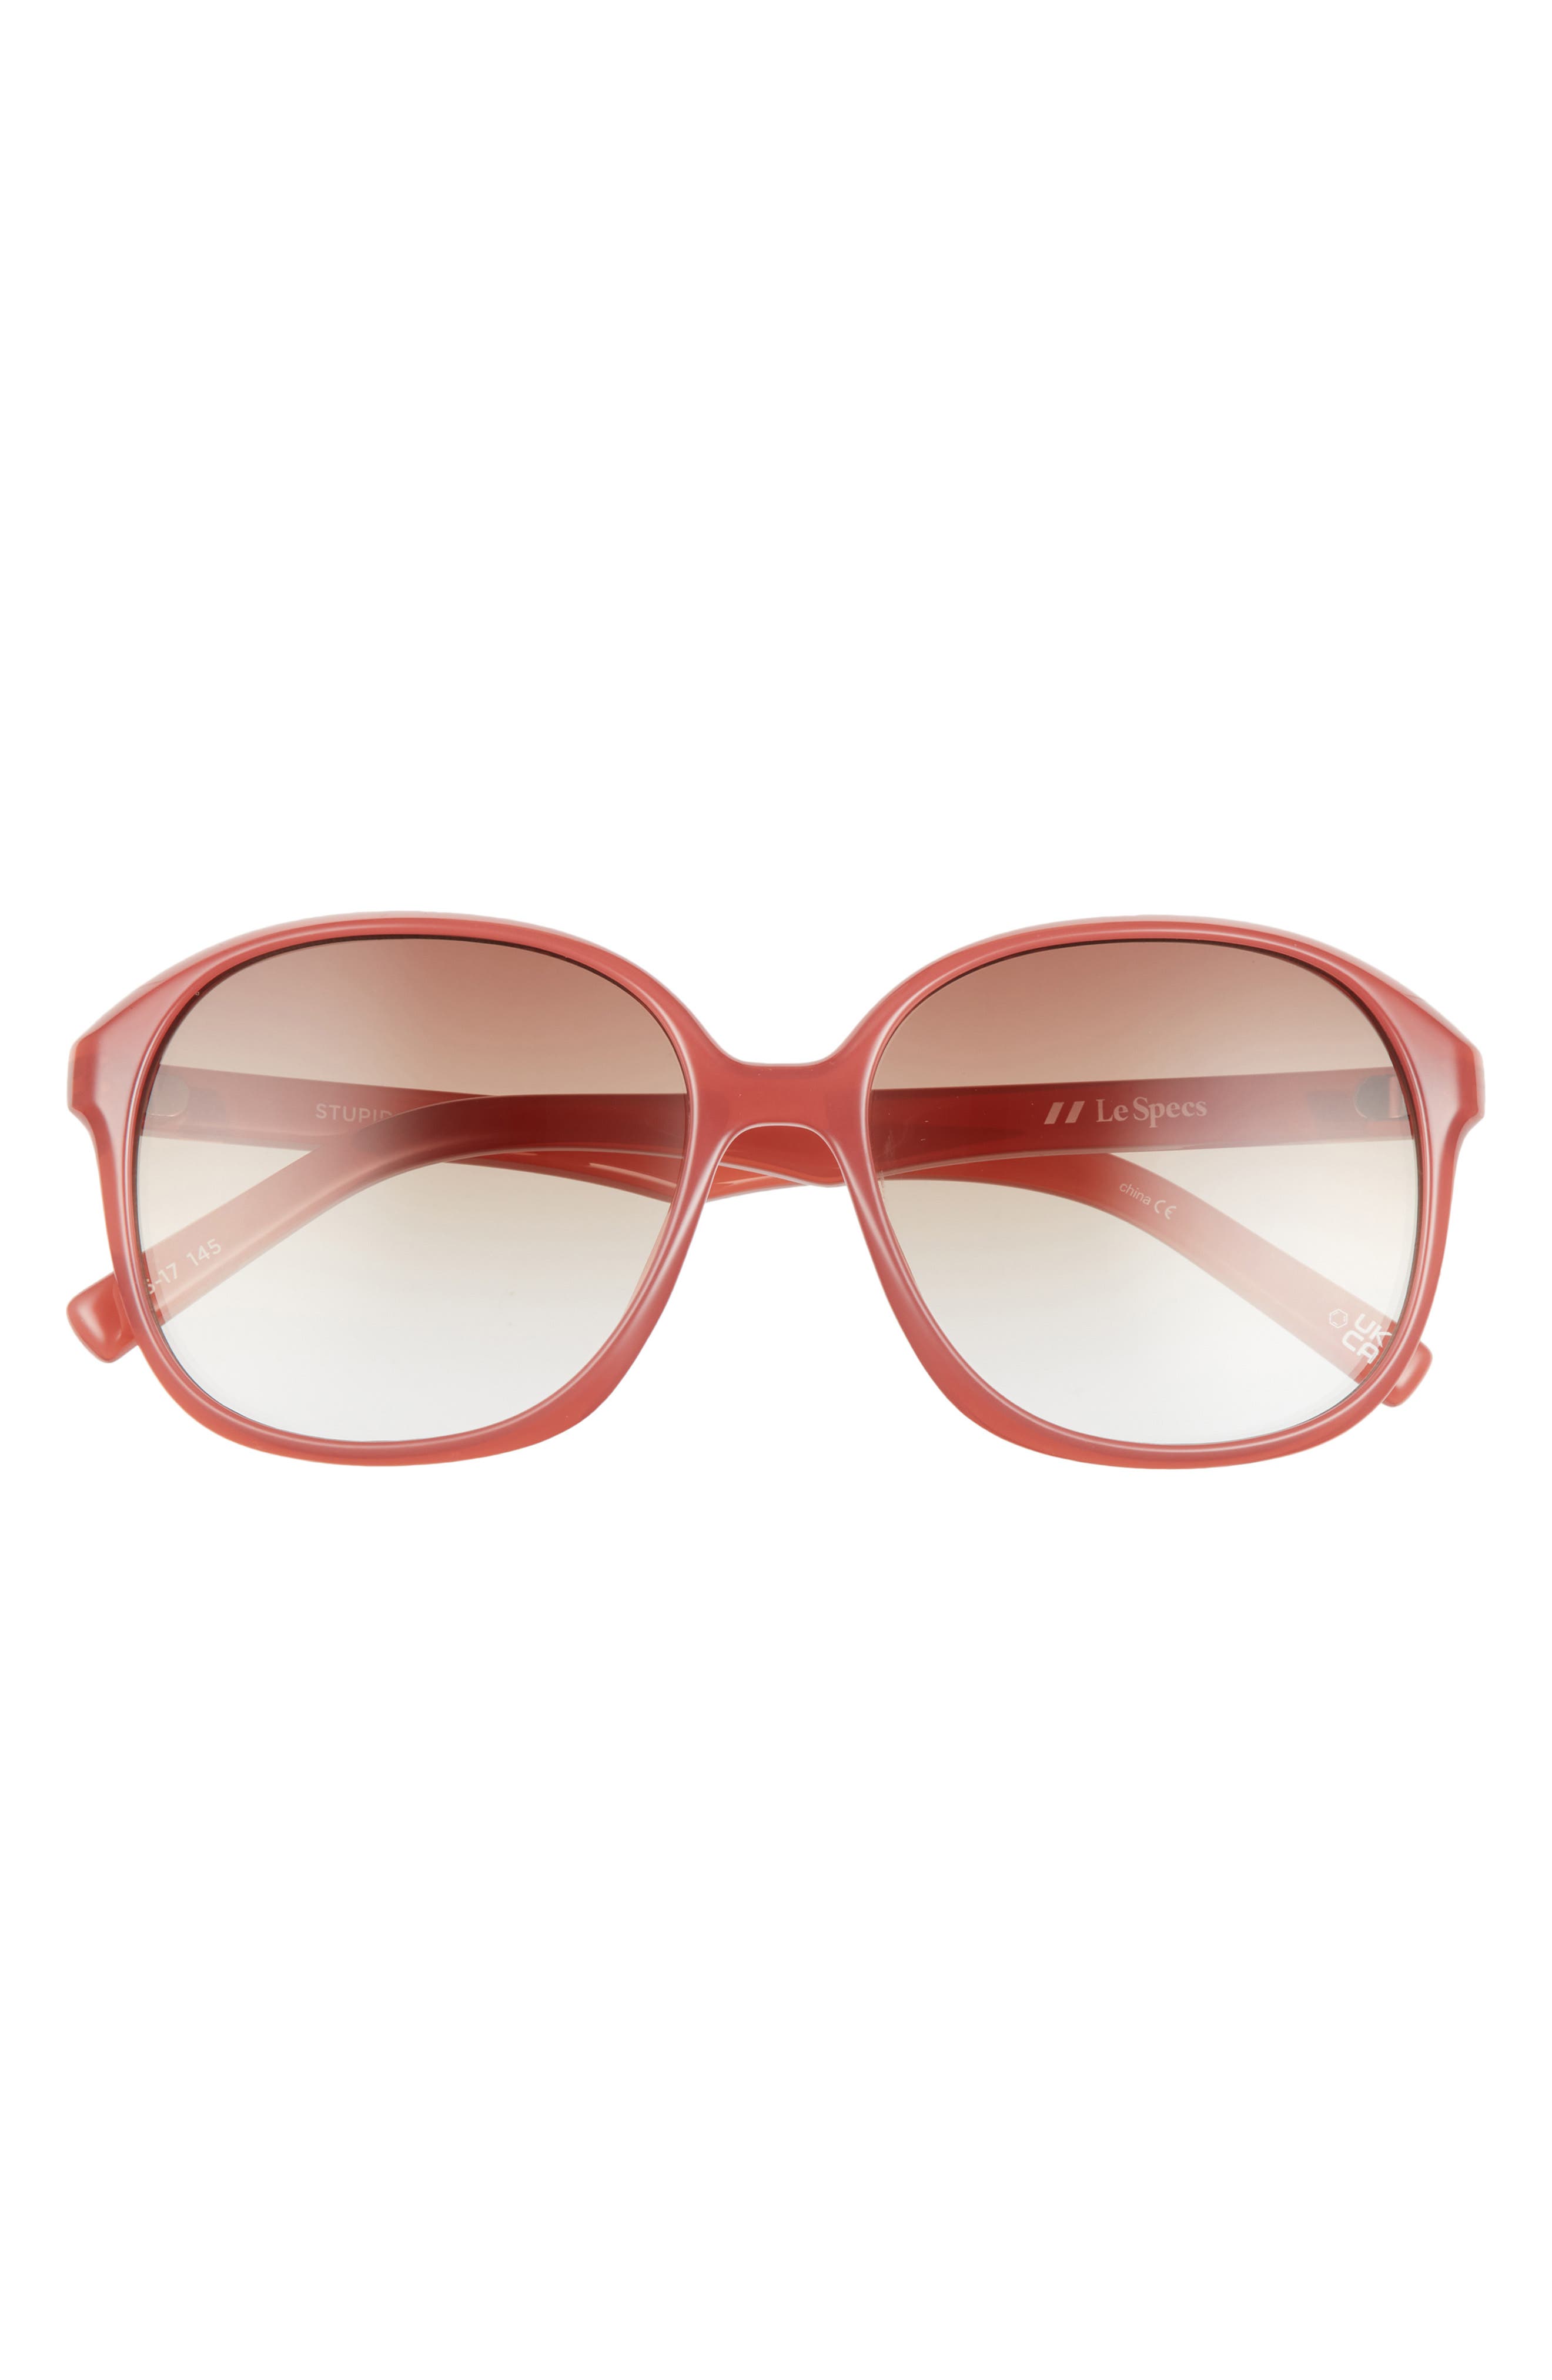 Le Specs Stupid Cupid 56mm Round Sunglasses in Rose Rouge/Tan Grad at Nordstrom